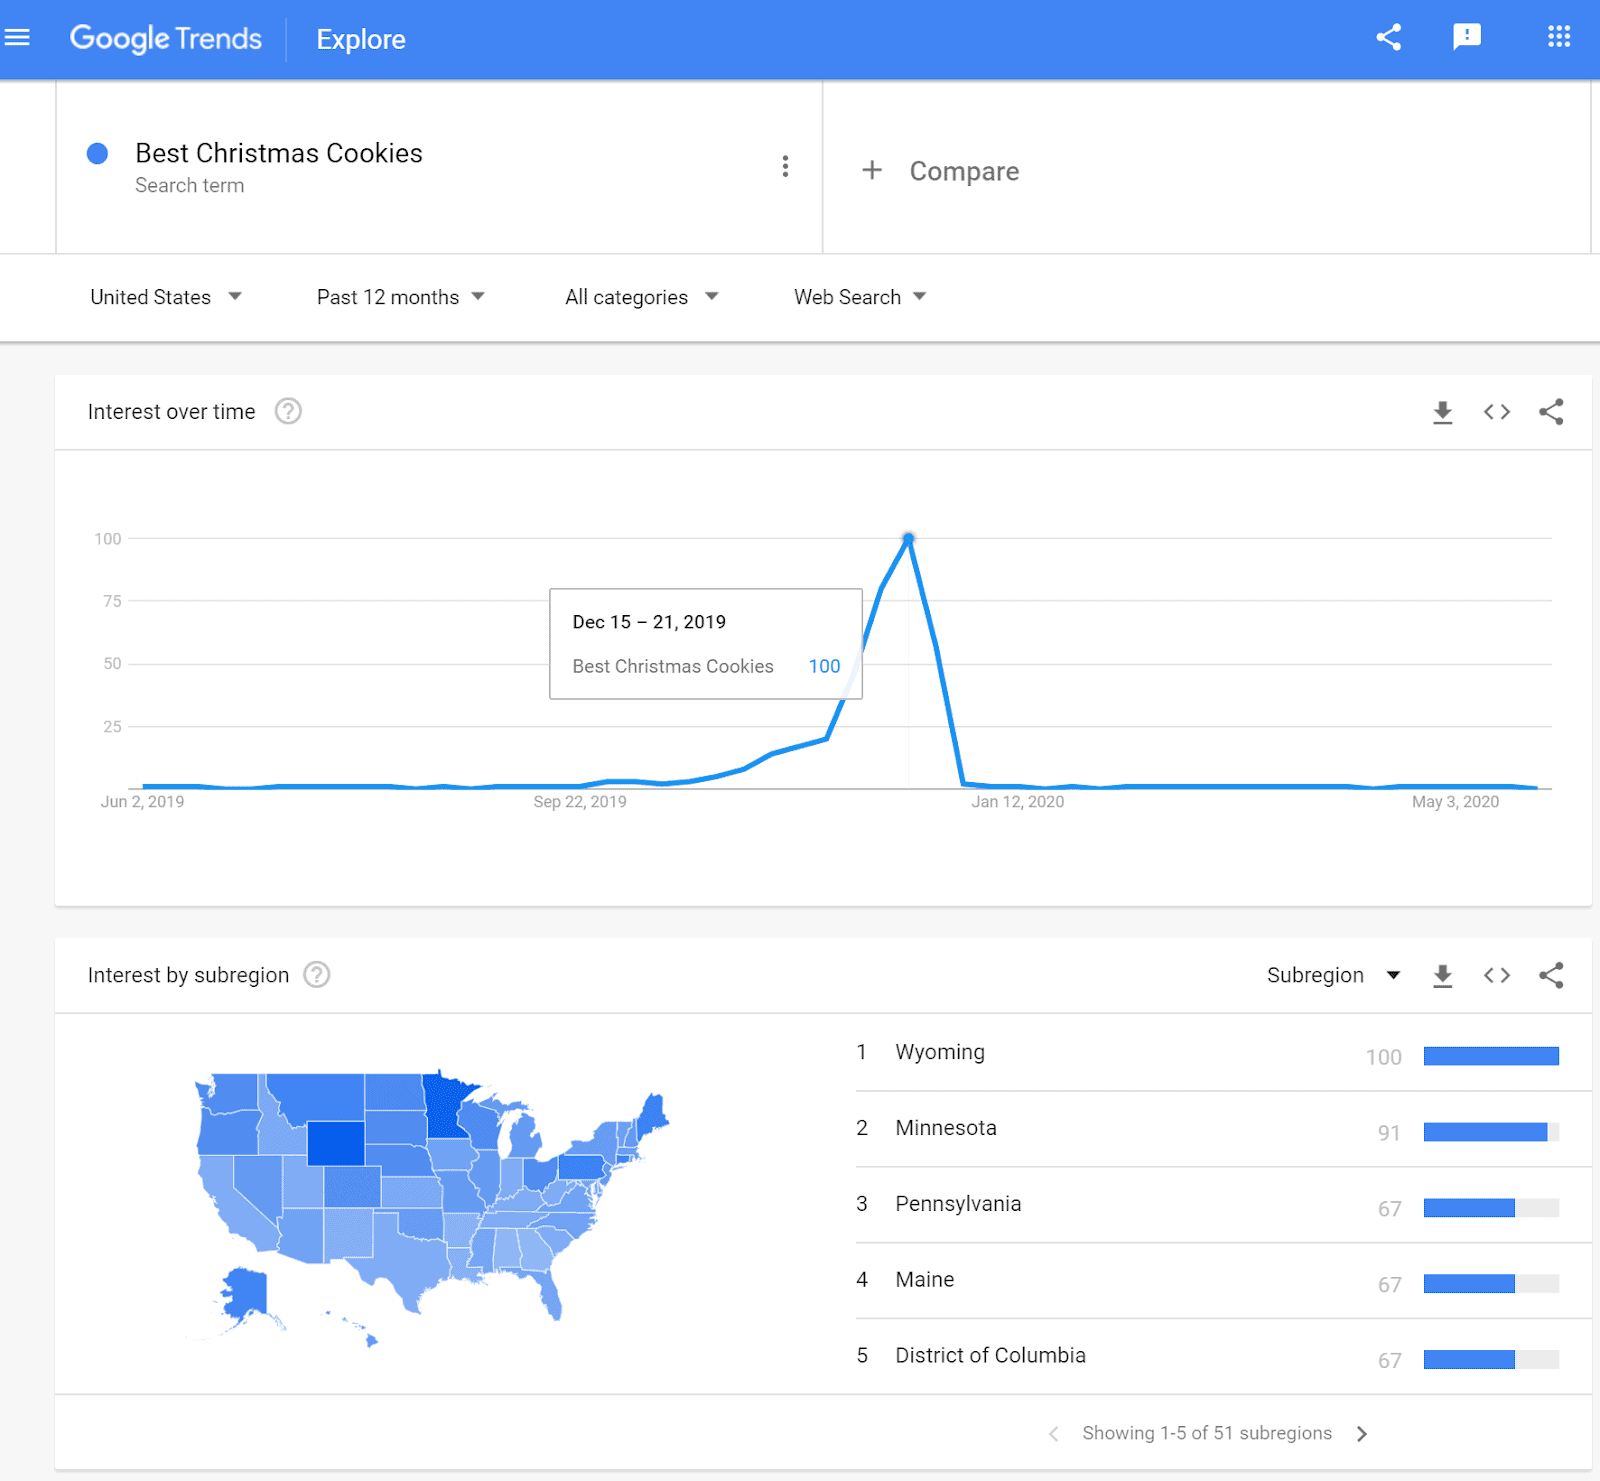 Google Trends explore page about Best Christmas Cookies